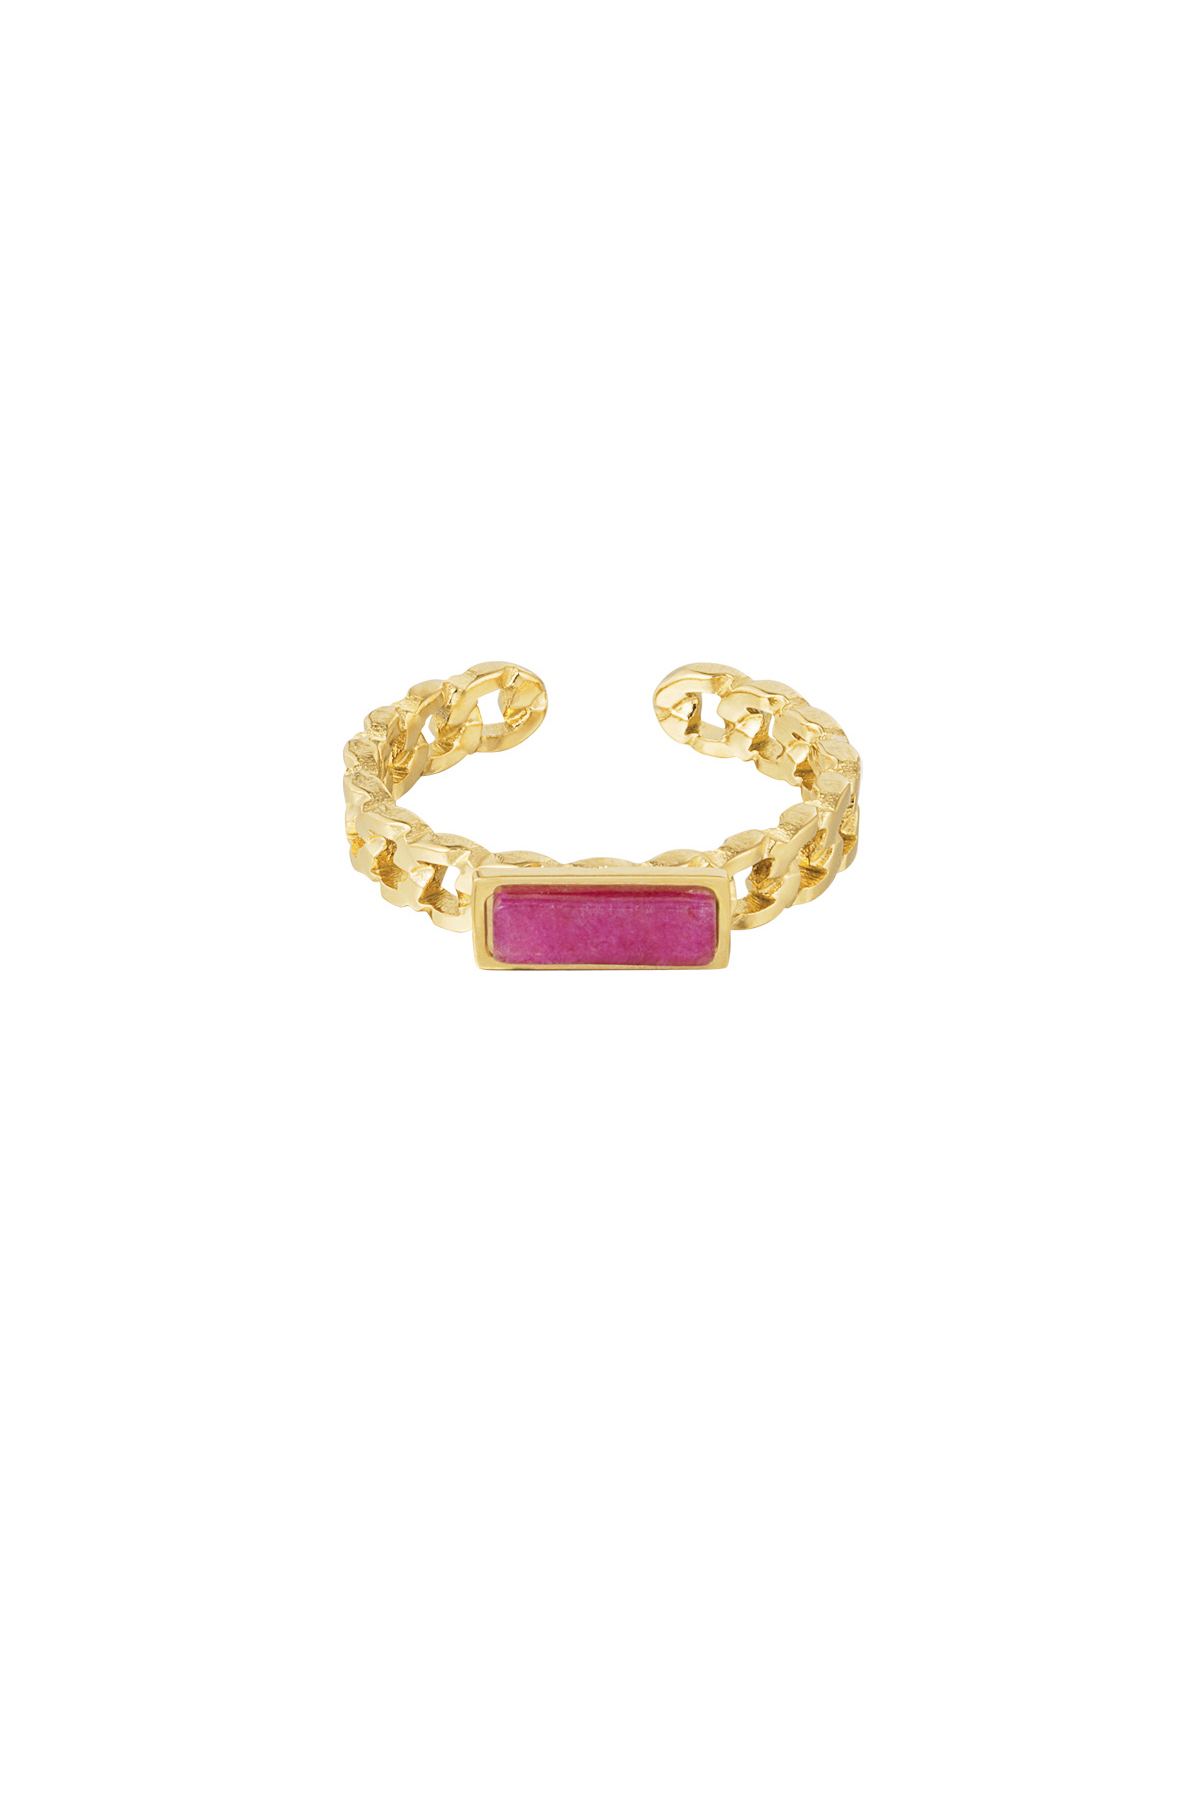 Bague maillons pierre fine - or/fuchsia